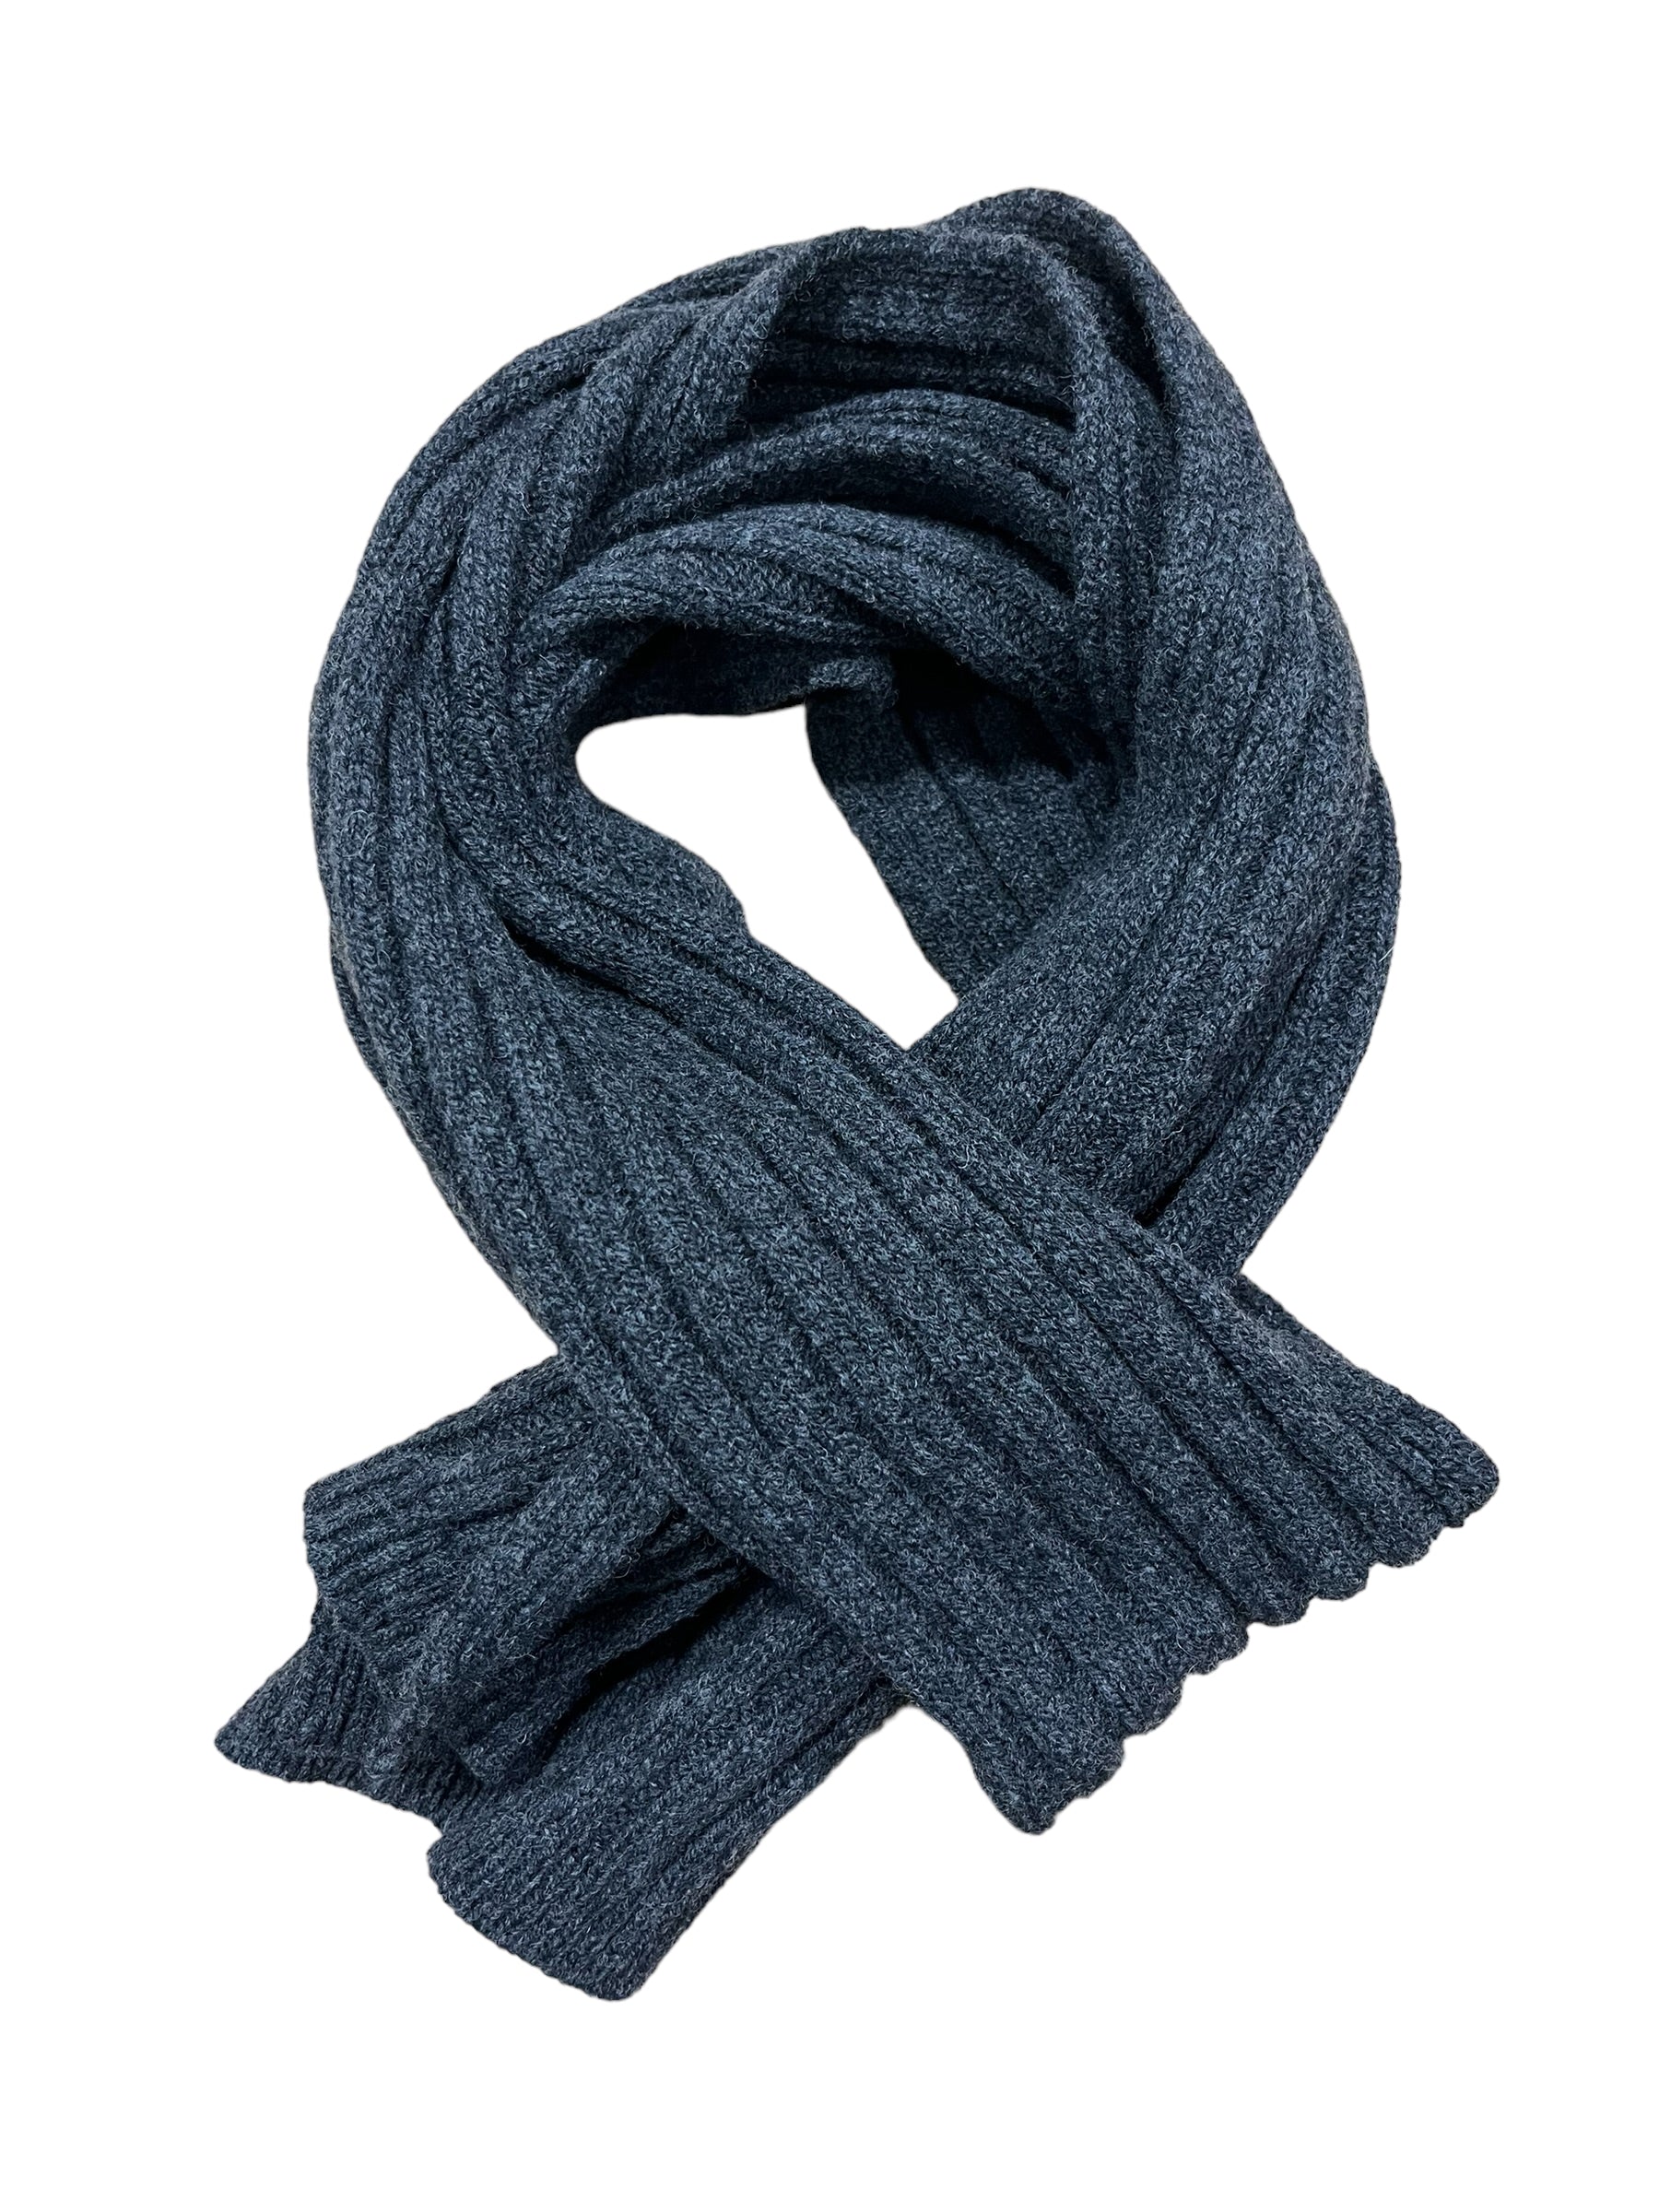 Merino and Cashmere Ribbed Scarf and/or Beanie